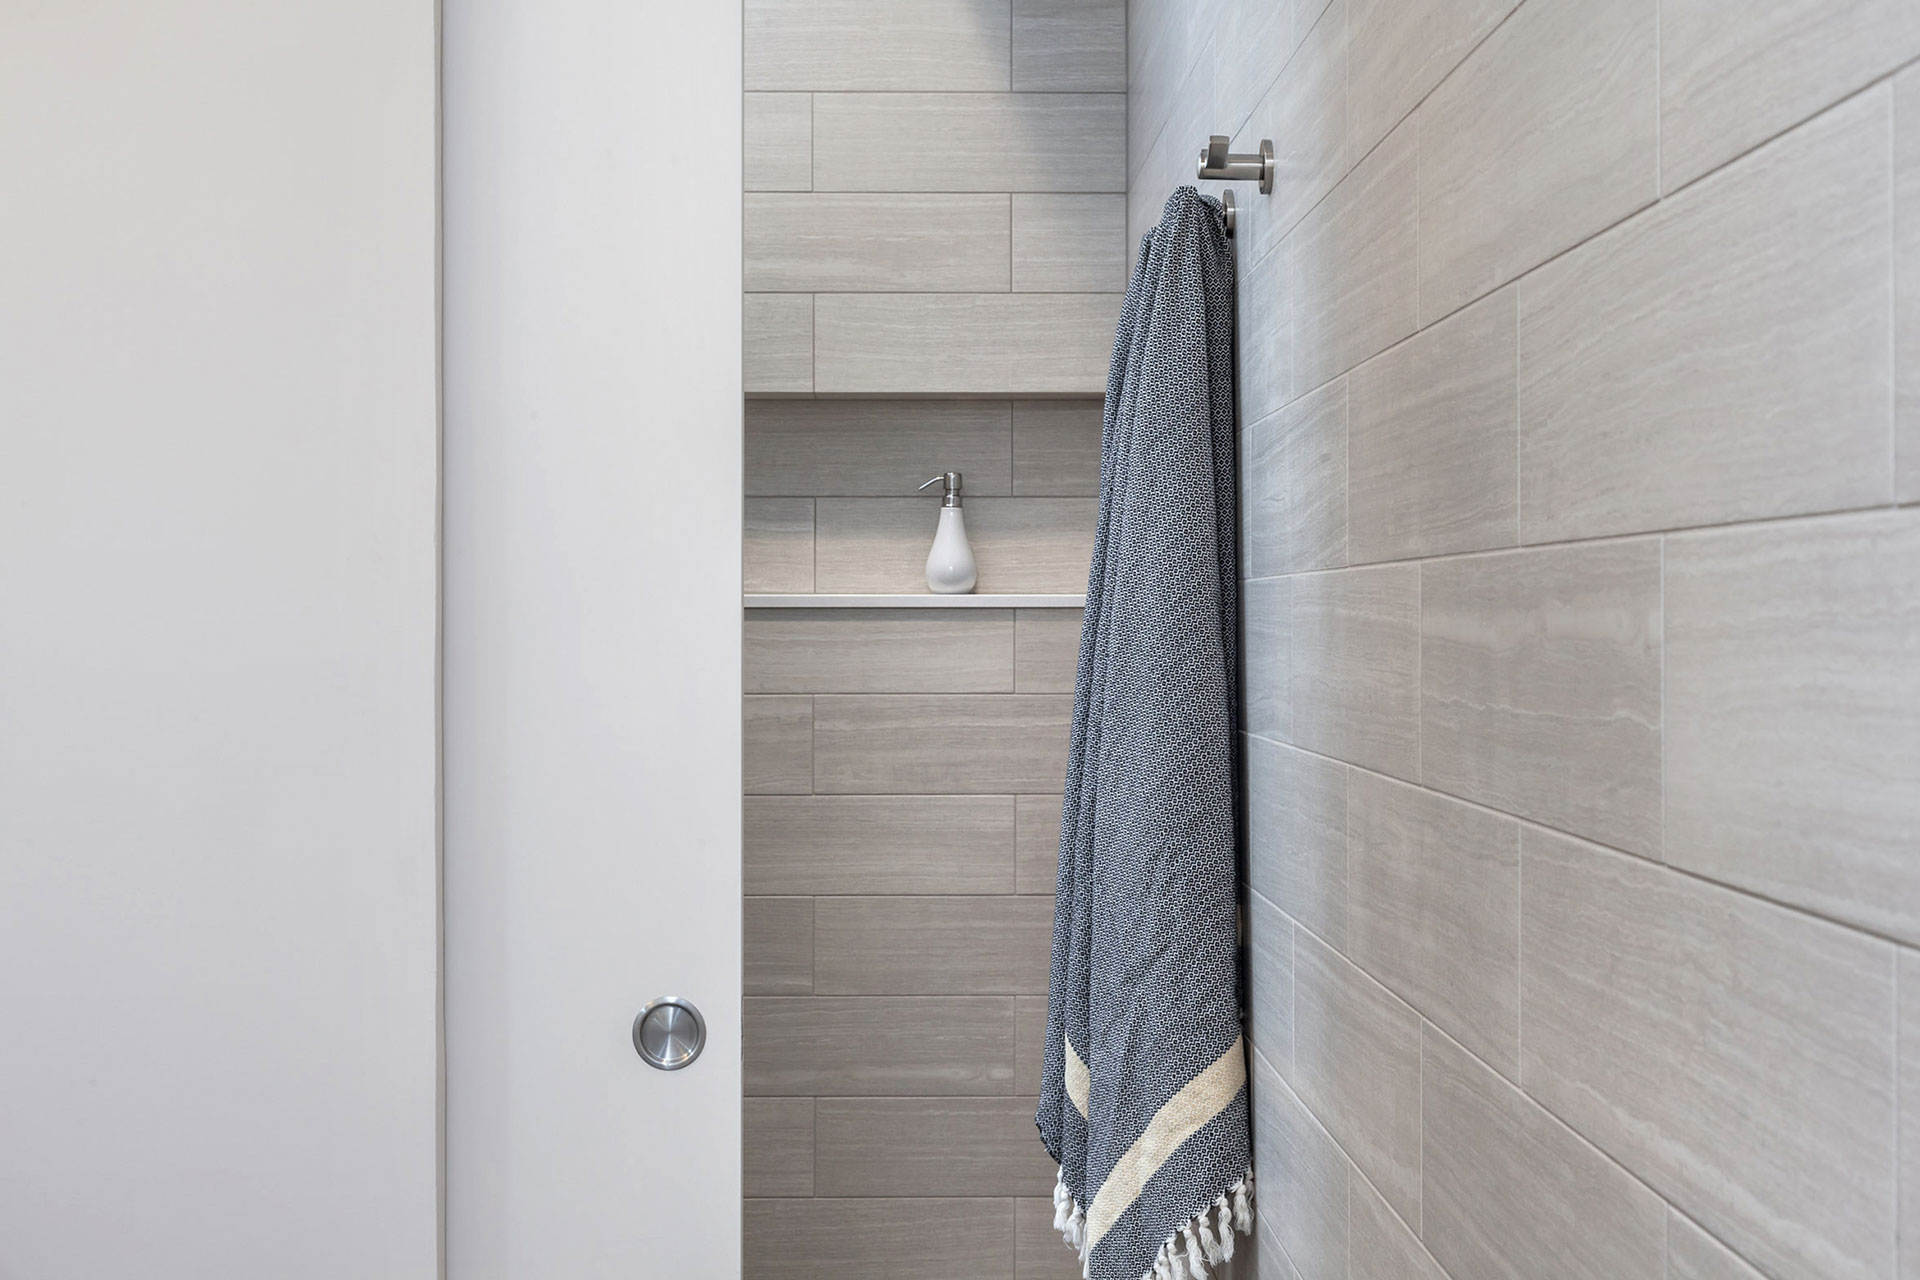 A towel hangs on a hook just outside of the shower in the primary bathroom at the Modern Farmhouse.